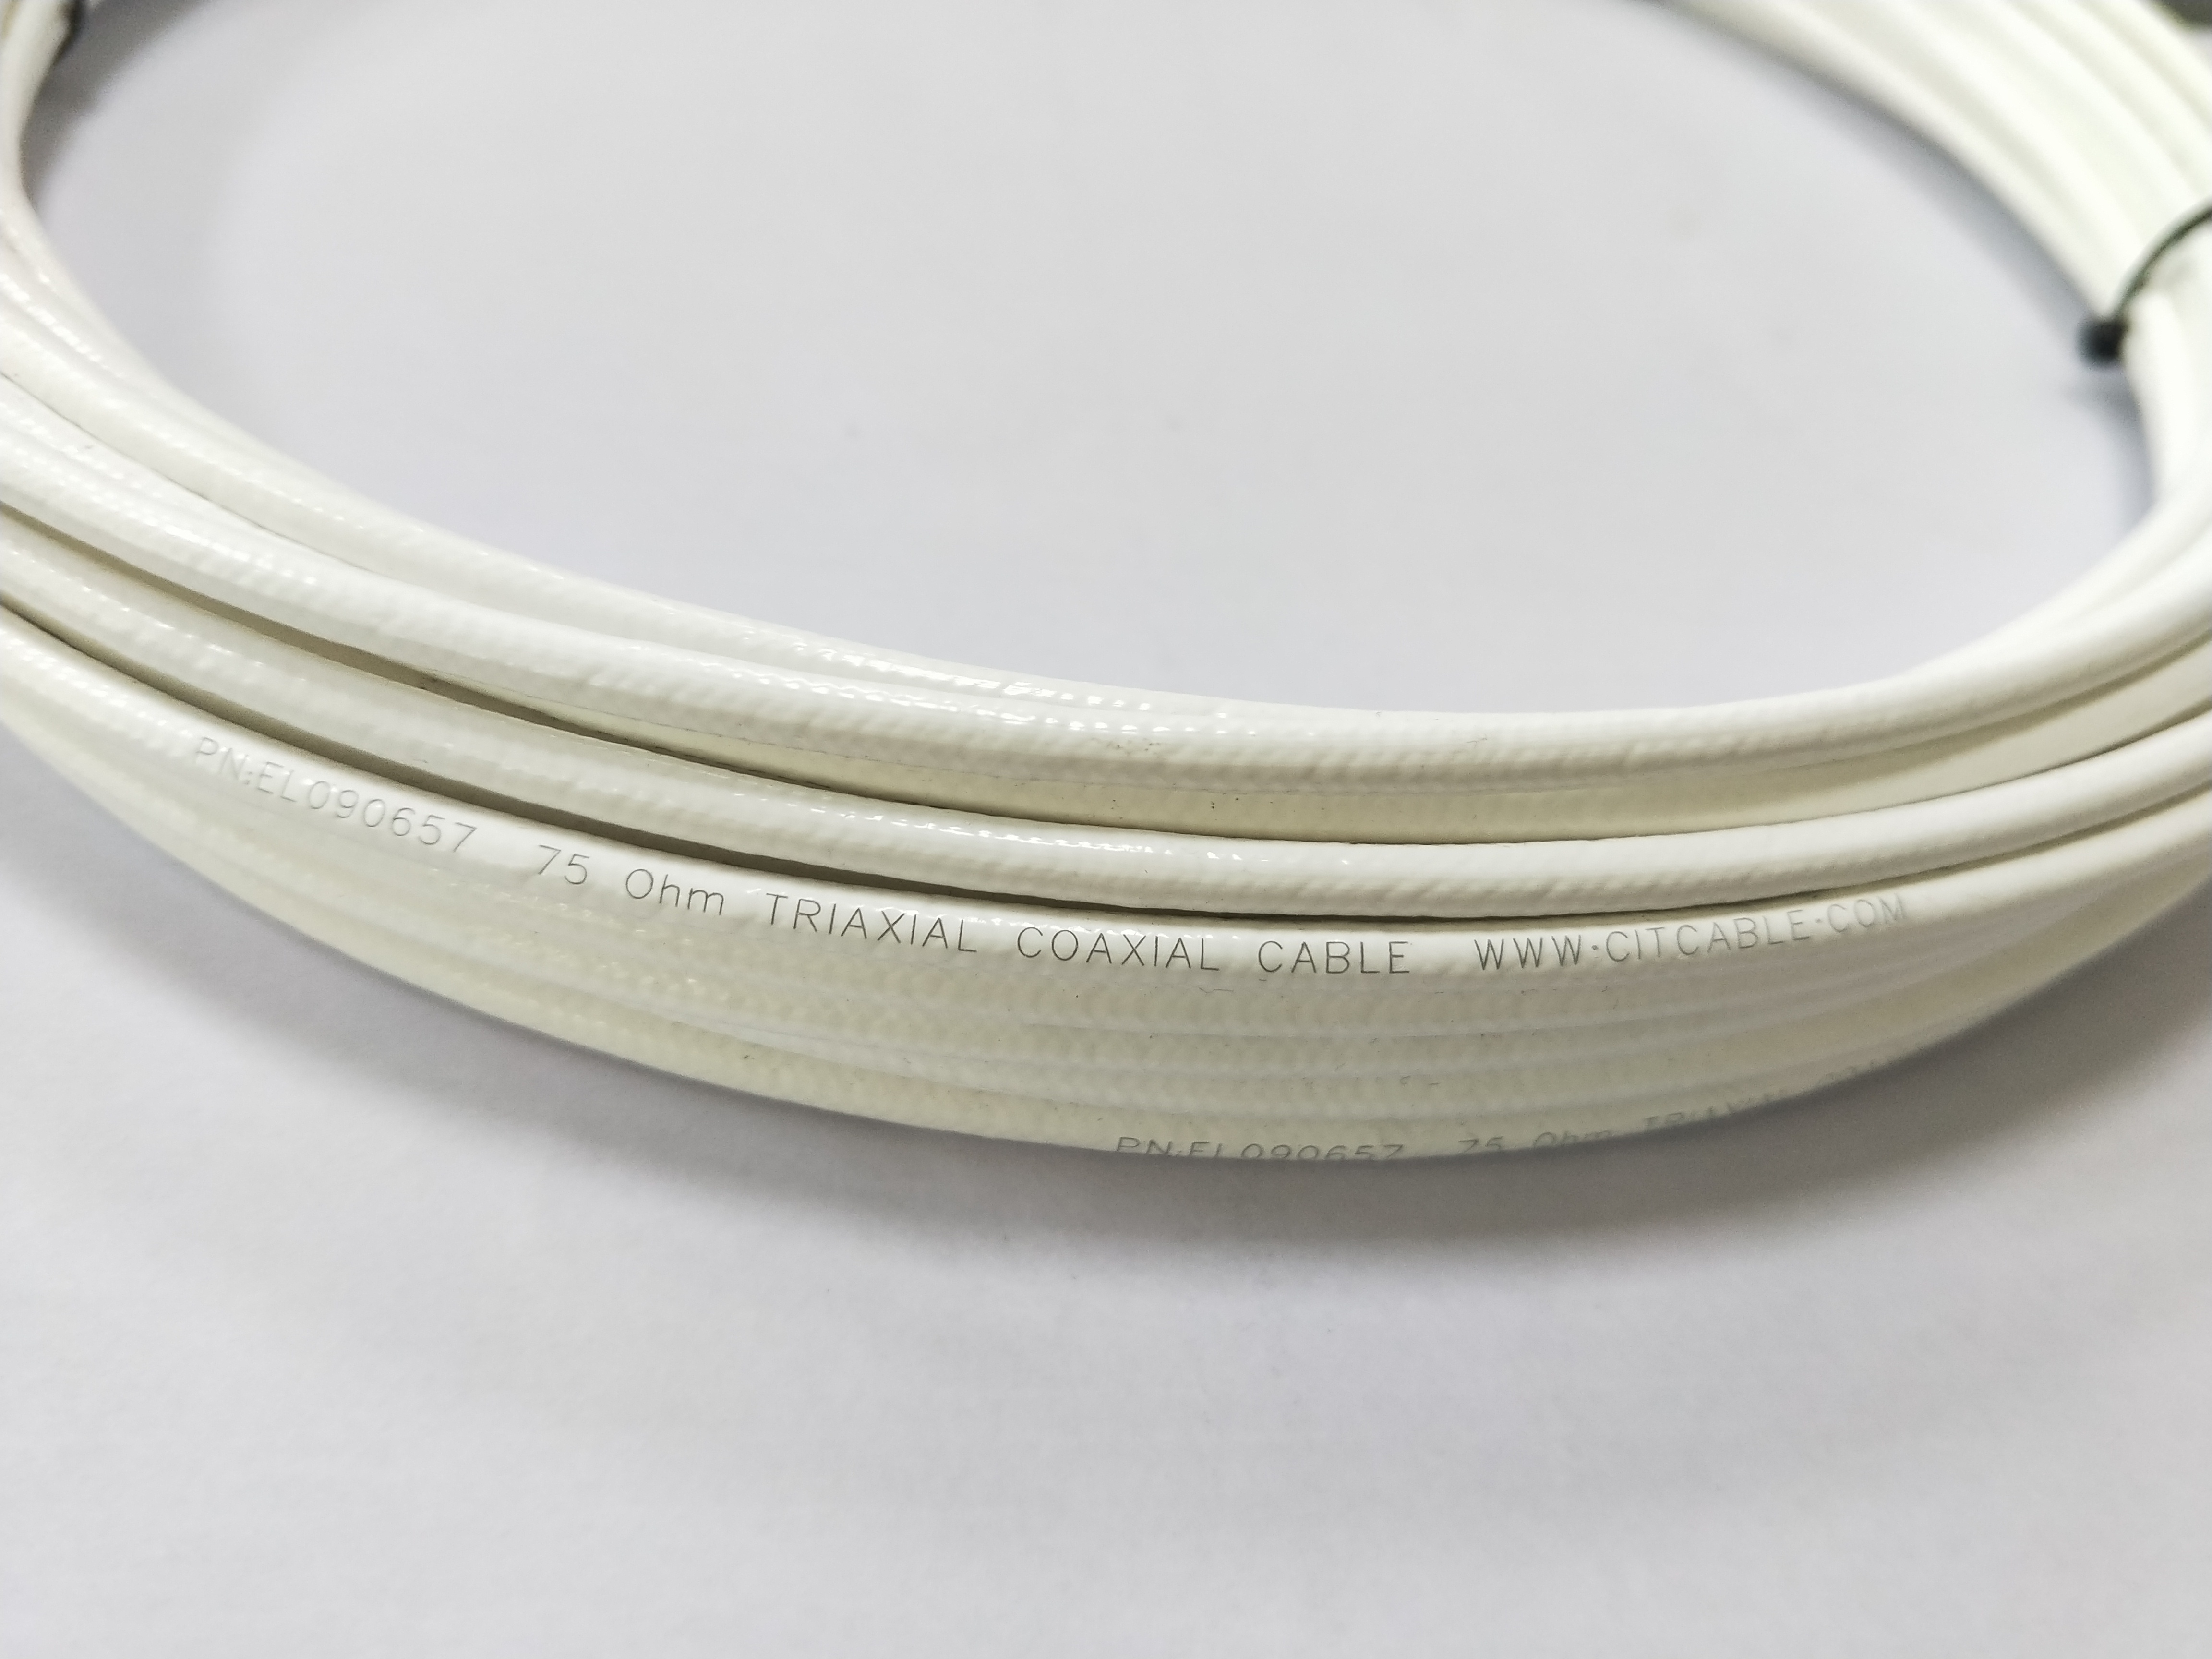 MFA Cable For Shielded And Unshielded Communication